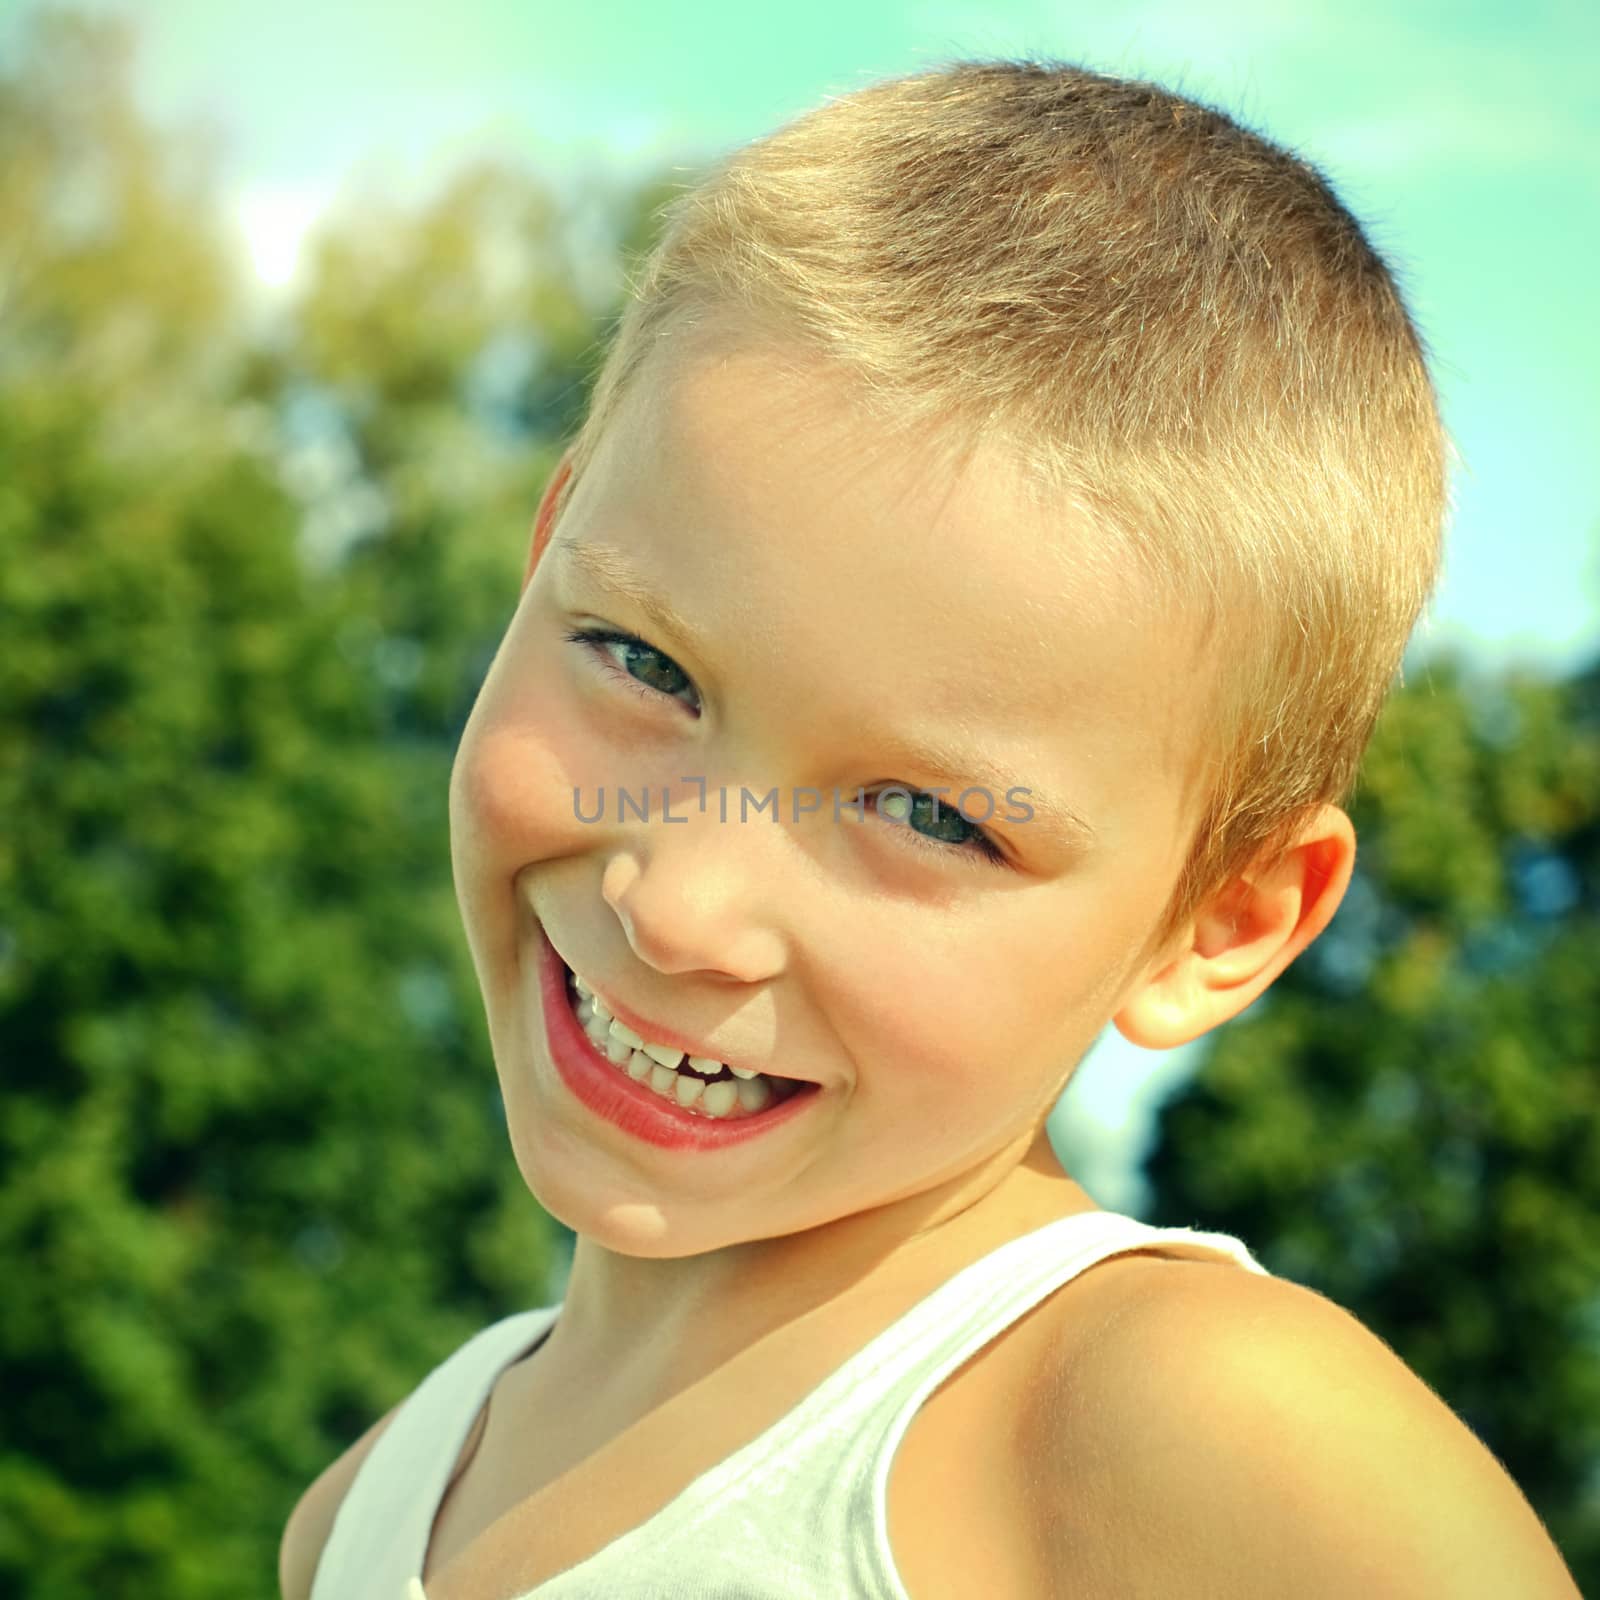 Toned Photo of the smiling Child Boy outdoor